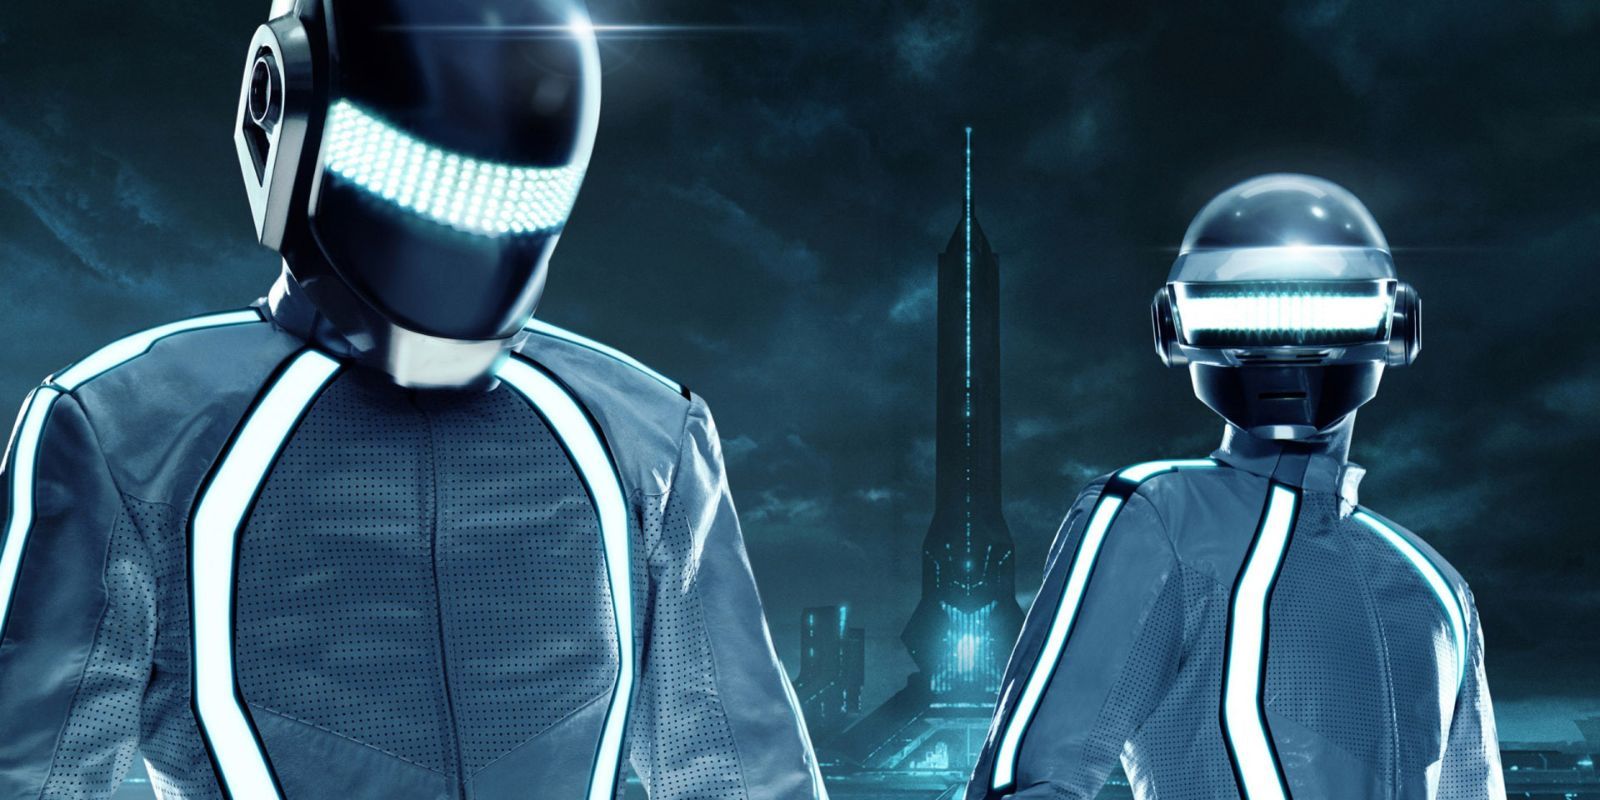 Daft Punk in the world of Tron: Legacy